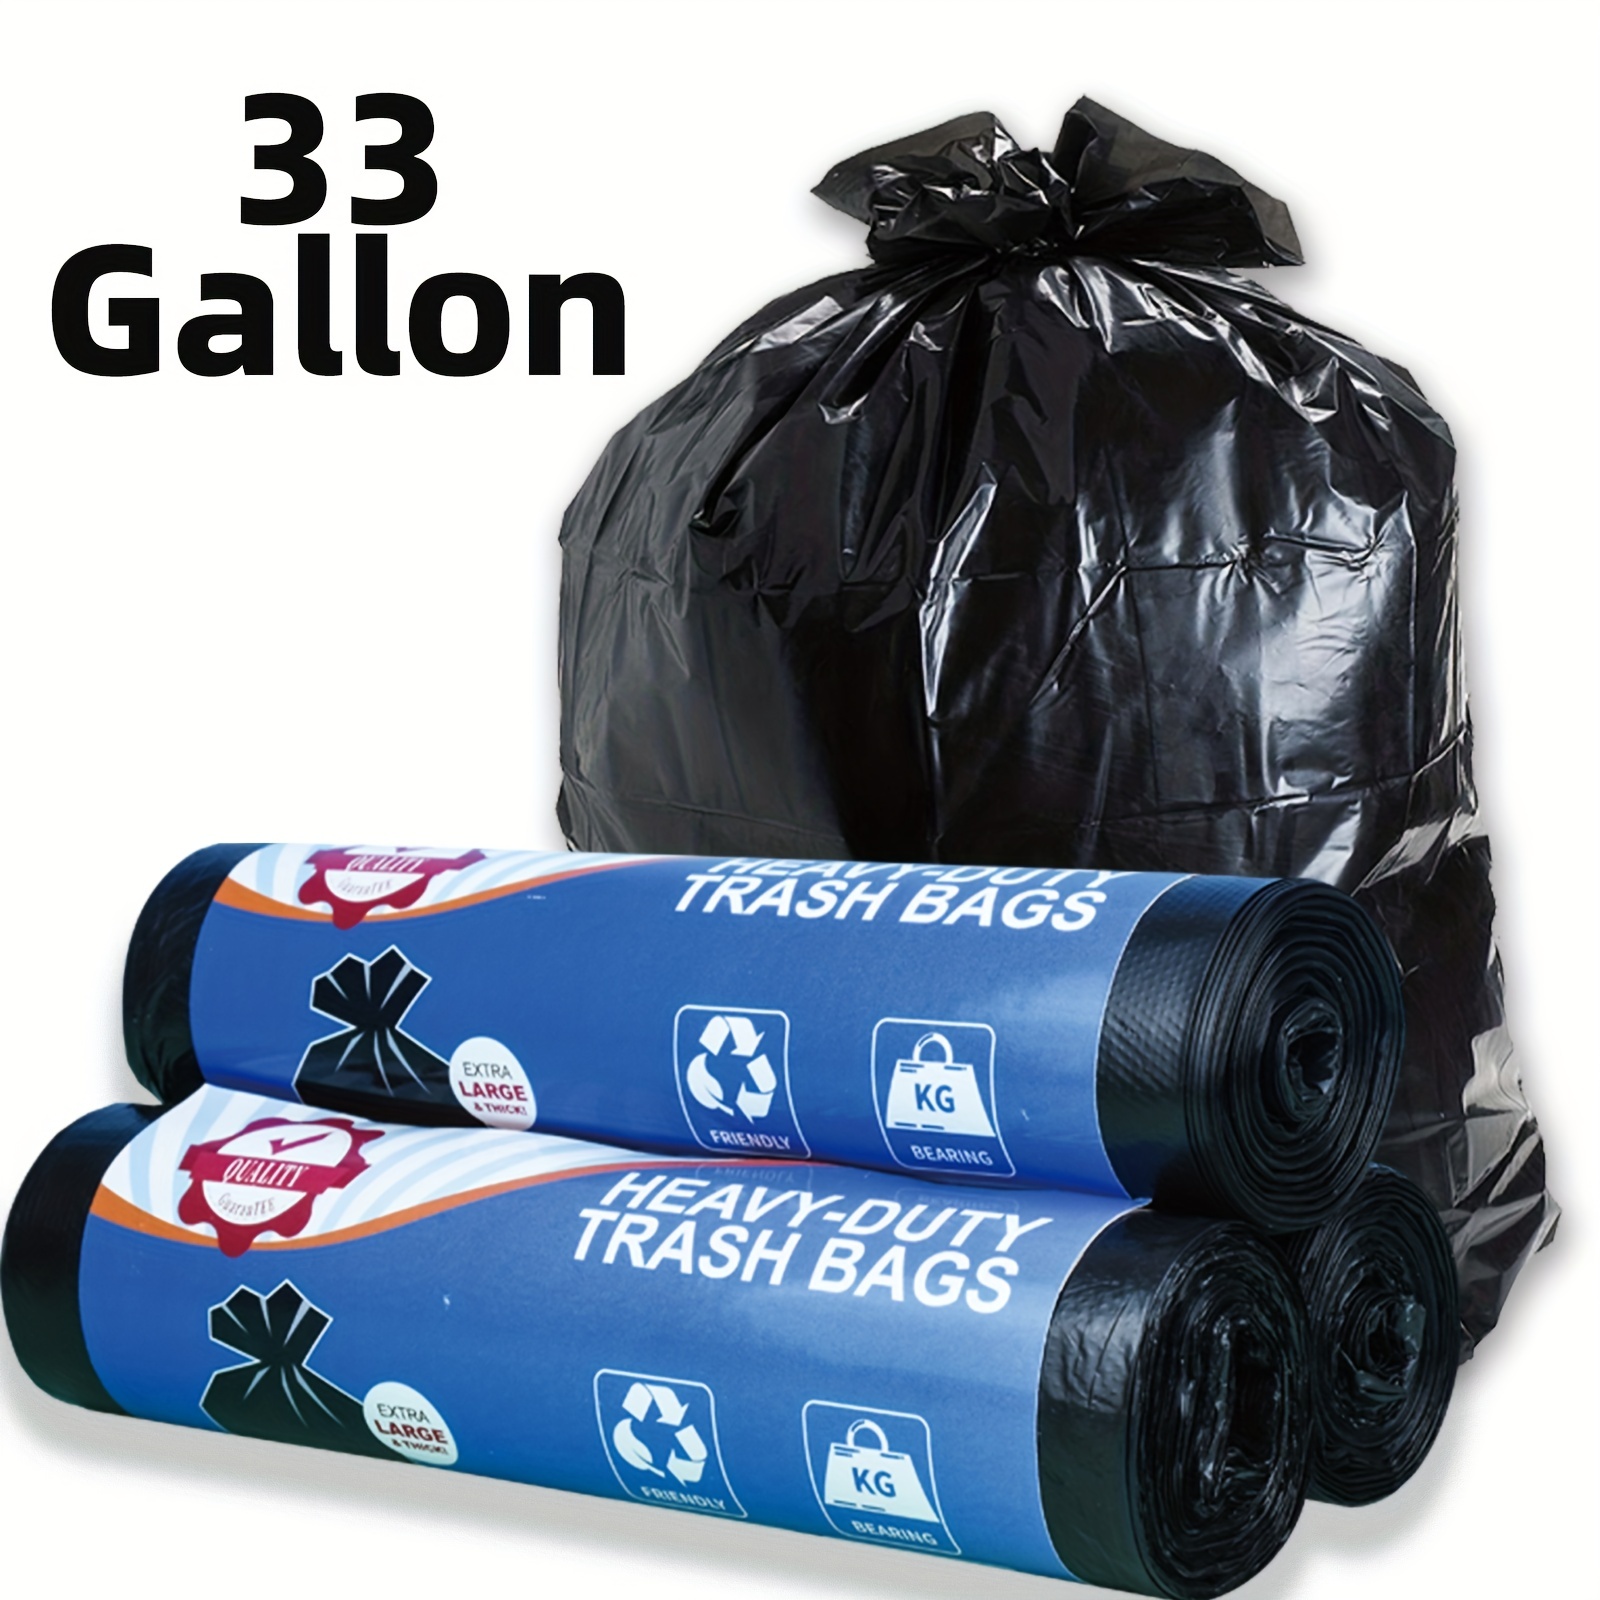 Home Times 200 Counts Small Trash Bags 2-4 Gallon, 2 3 4 Gal Ultra Thickness Bathroom Garbage Bags, Biodegradable Mini Wastebasket Trash Can Liners